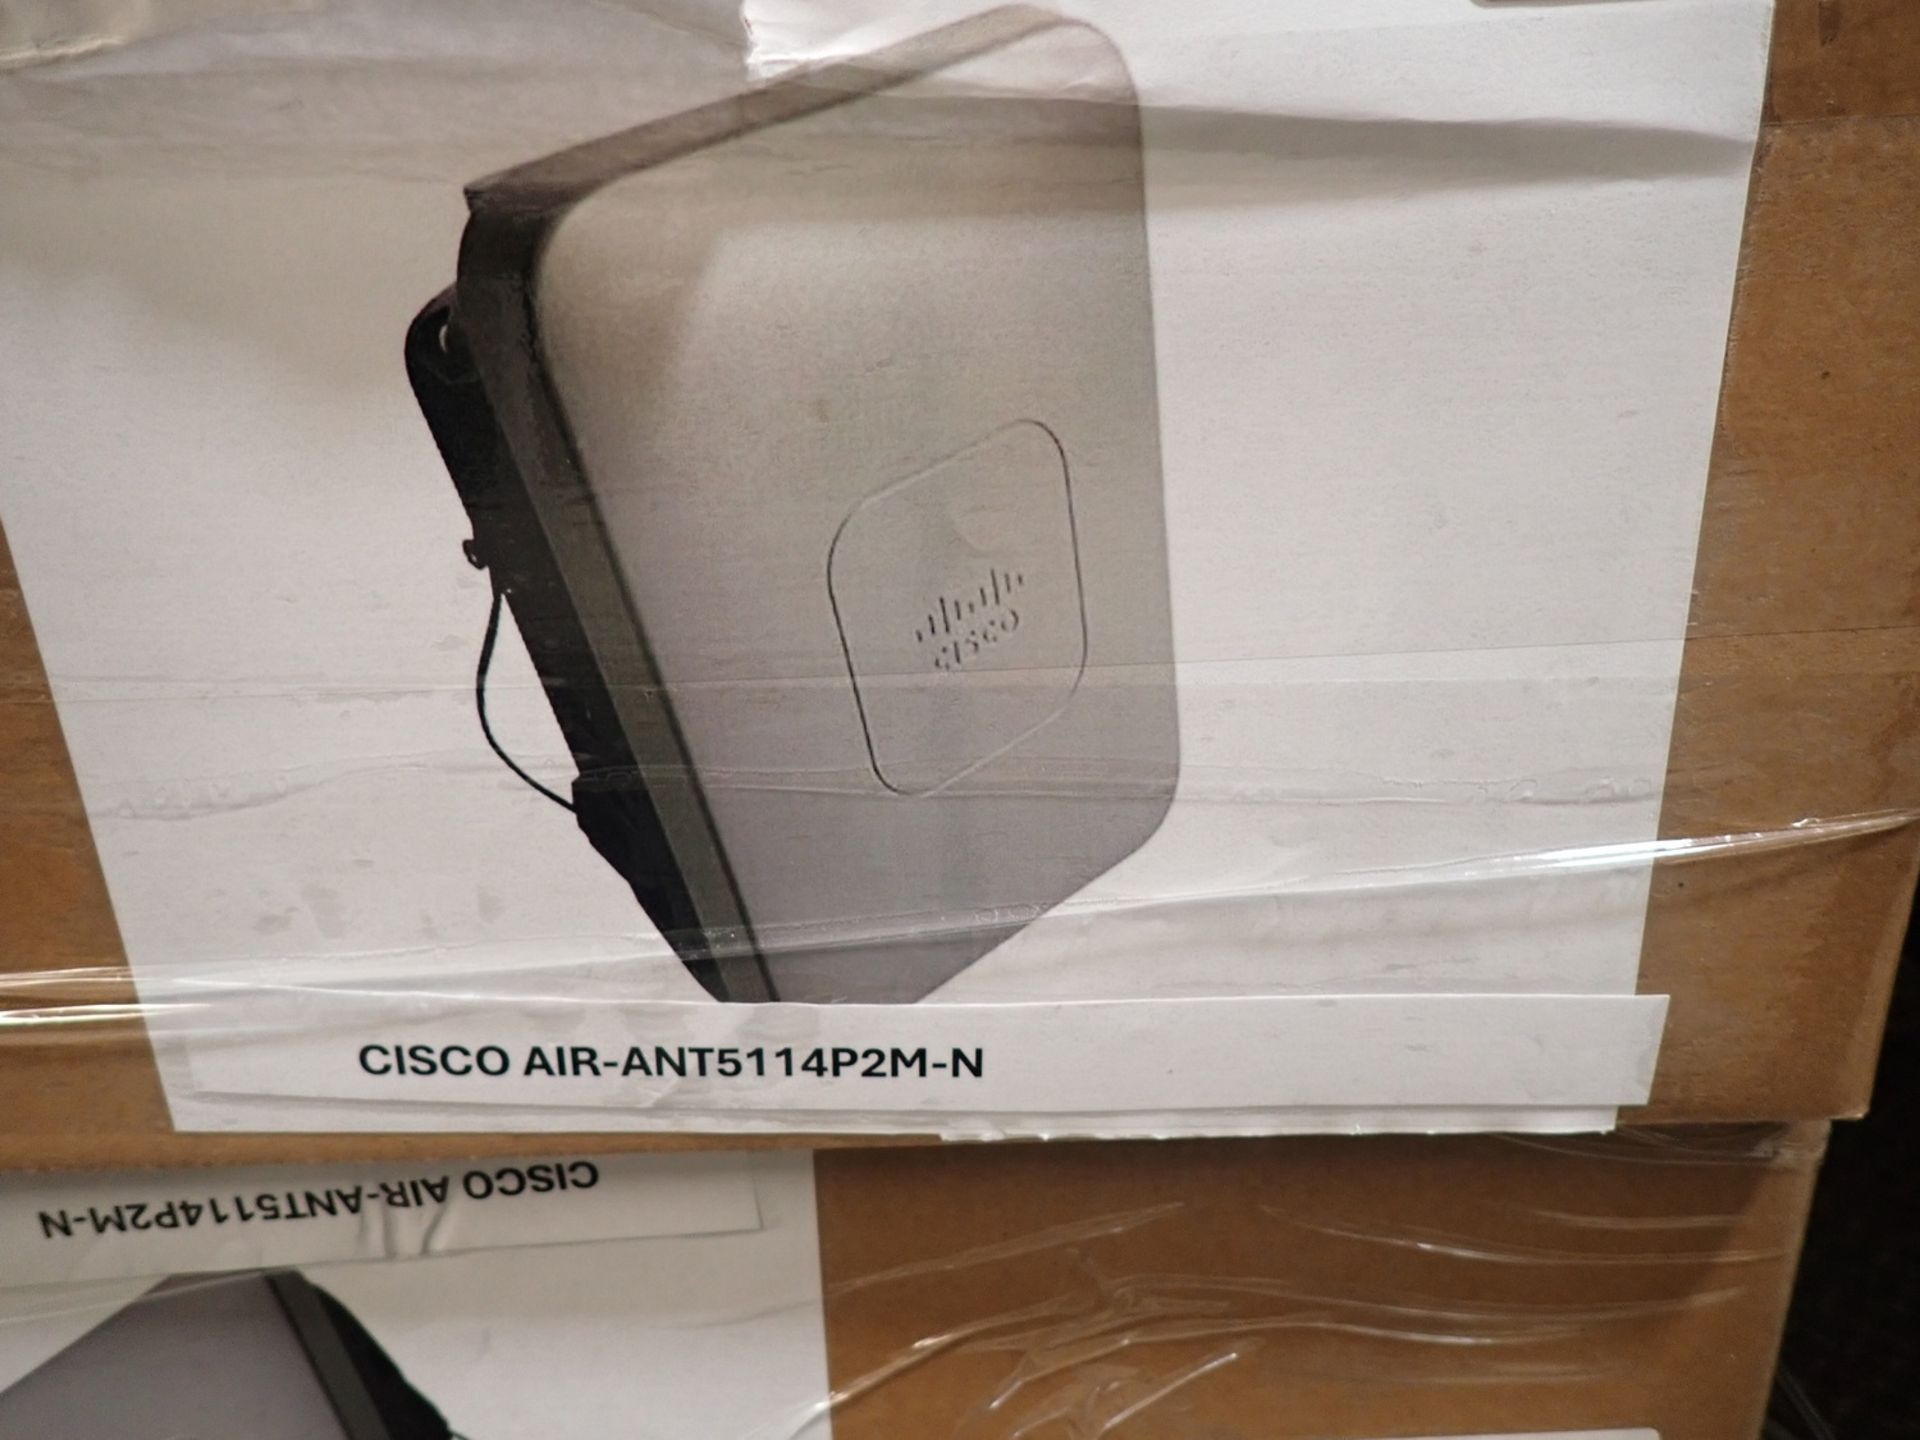 LOT - CISCO (3) AIRONET 5GHZ 14-DBI, (4) AIR-ANT 5114P2N-N DIRECTIONAL ANTENNAS - Image 3 of 3